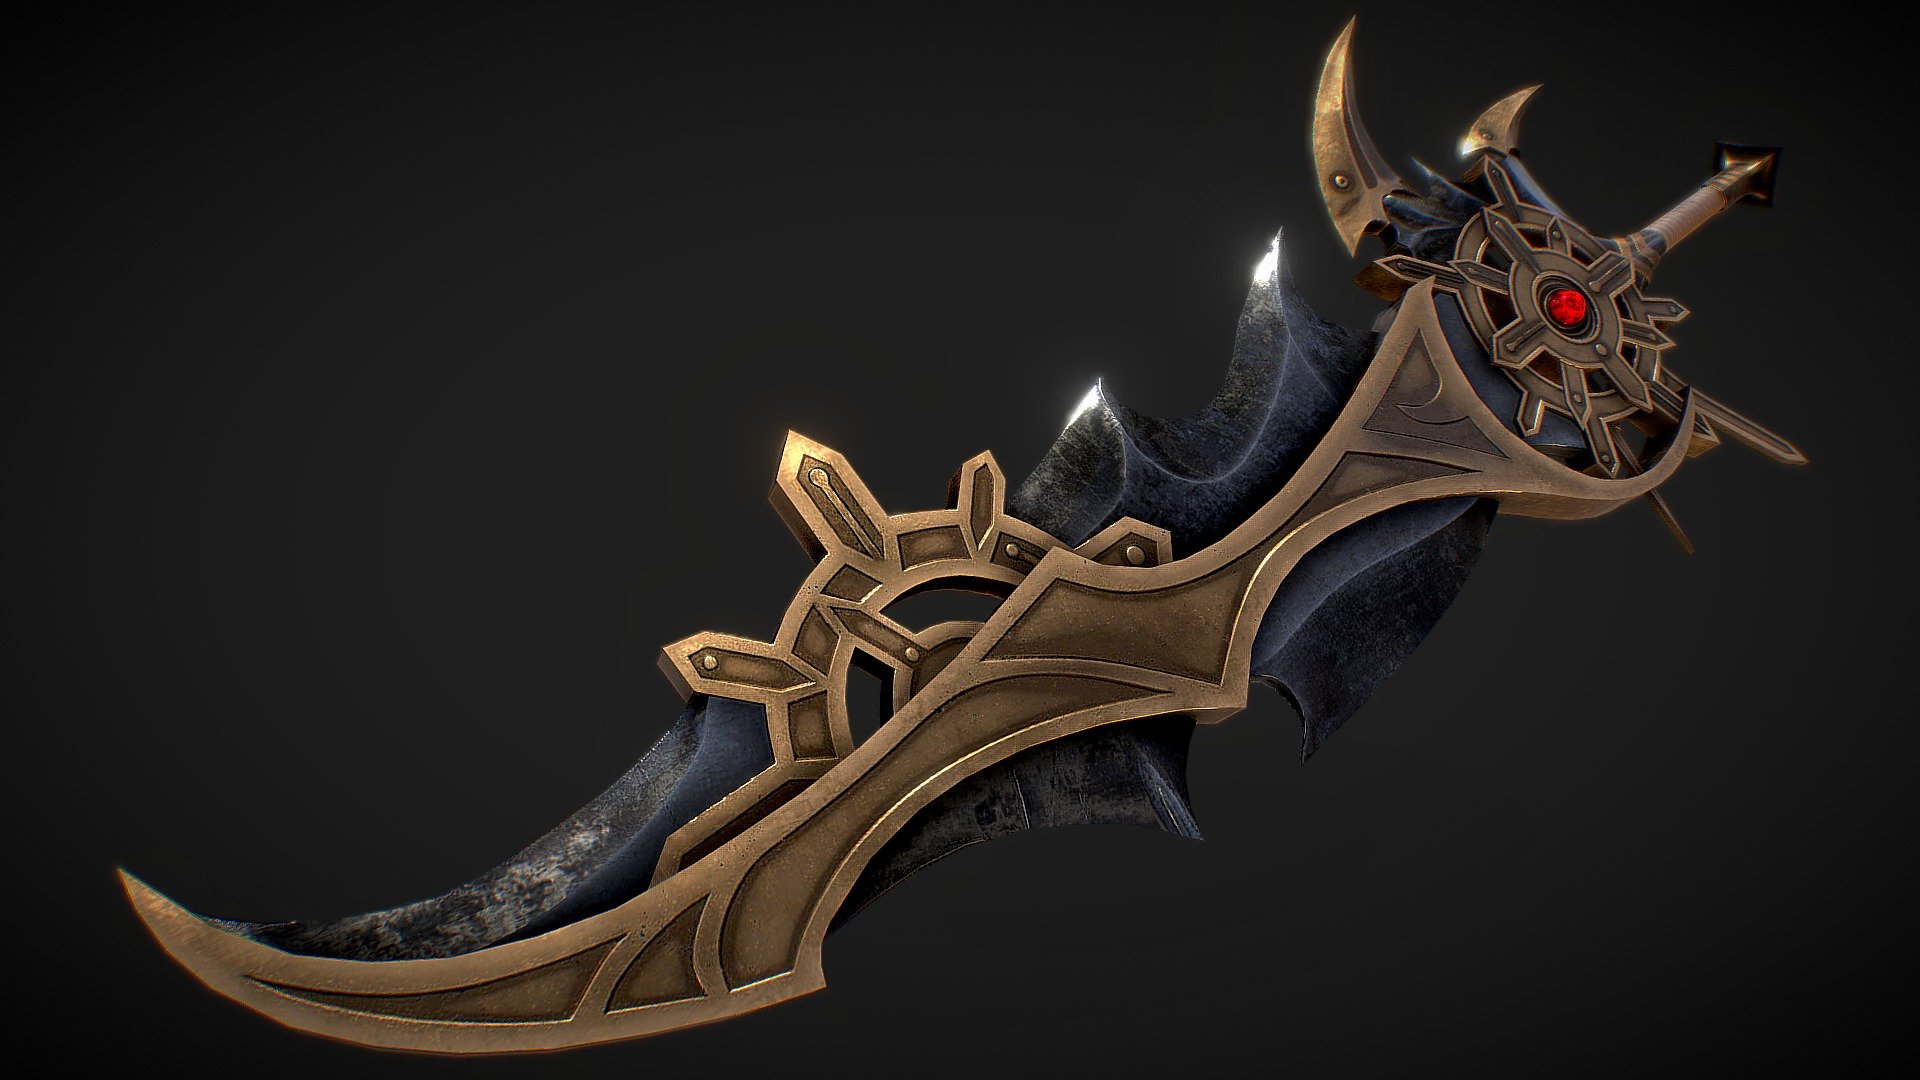 This is the 3d model of fantasy gear(clock version) sword, for use in animations, renders, games, printing&hellip; etc.

The rar files contains various file formats: 




.blend

.obj

 .fbx

 .gltf

 .mtl

 .stl

 Substance painter(.spp)




Specifications:





Vertices: 1862

Polygons: 3364

Materials: 1

Textures: 



Model including all PBR textures set.(512 - 4k)




Diffuse/Albedo

Metallic

Roughness

Normal(OpenGL, Direct x) 

Height 

Ambient Occlusion

The .blend file is the original version prepared to render.

Feel free to ask any question or request modifications.
Visit my profile to find more products.


Created in blender, Substance painter 

Its non commertial model!!
 - Fantasy gear sword - Buy Royalty Free 3D model by (v•Ä•₼.P•†•R•È) (@nagi2427) 3d model